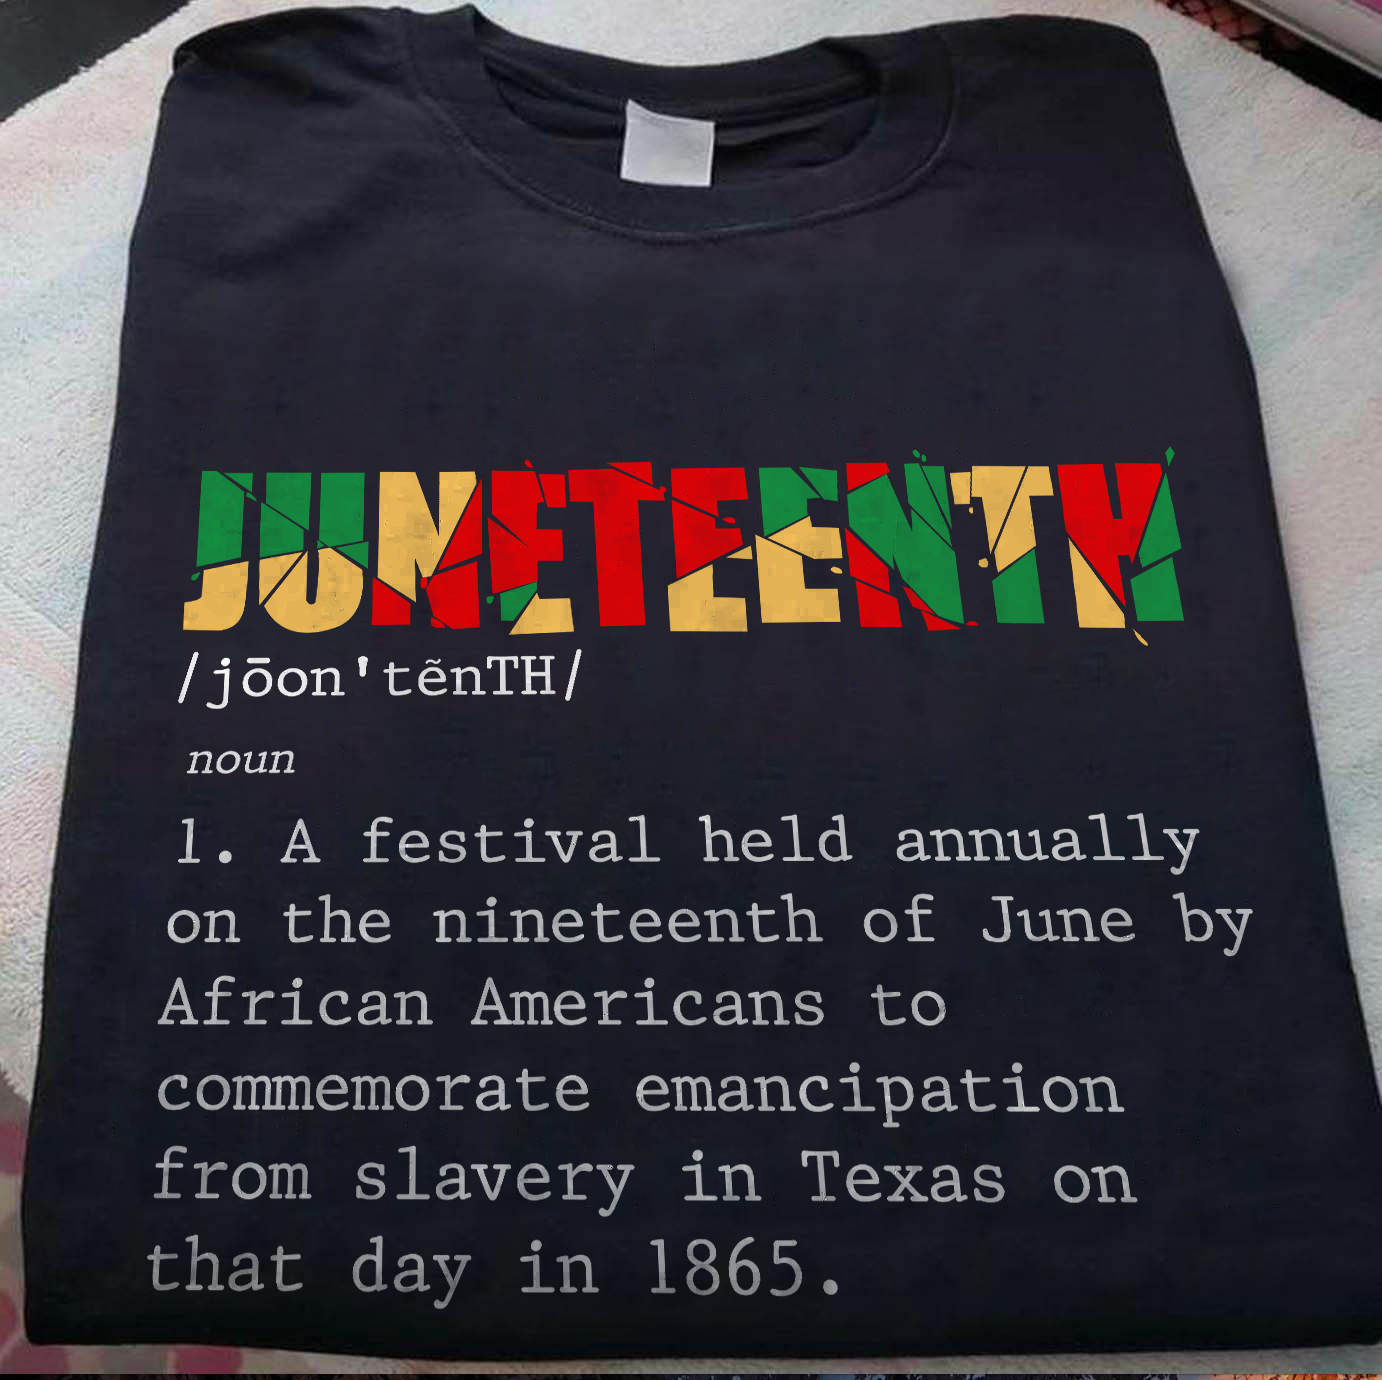 Juneteenth a festival held annually on the nineteenth of june by commemorate emancipation from slavery in Texas on that day in 1865